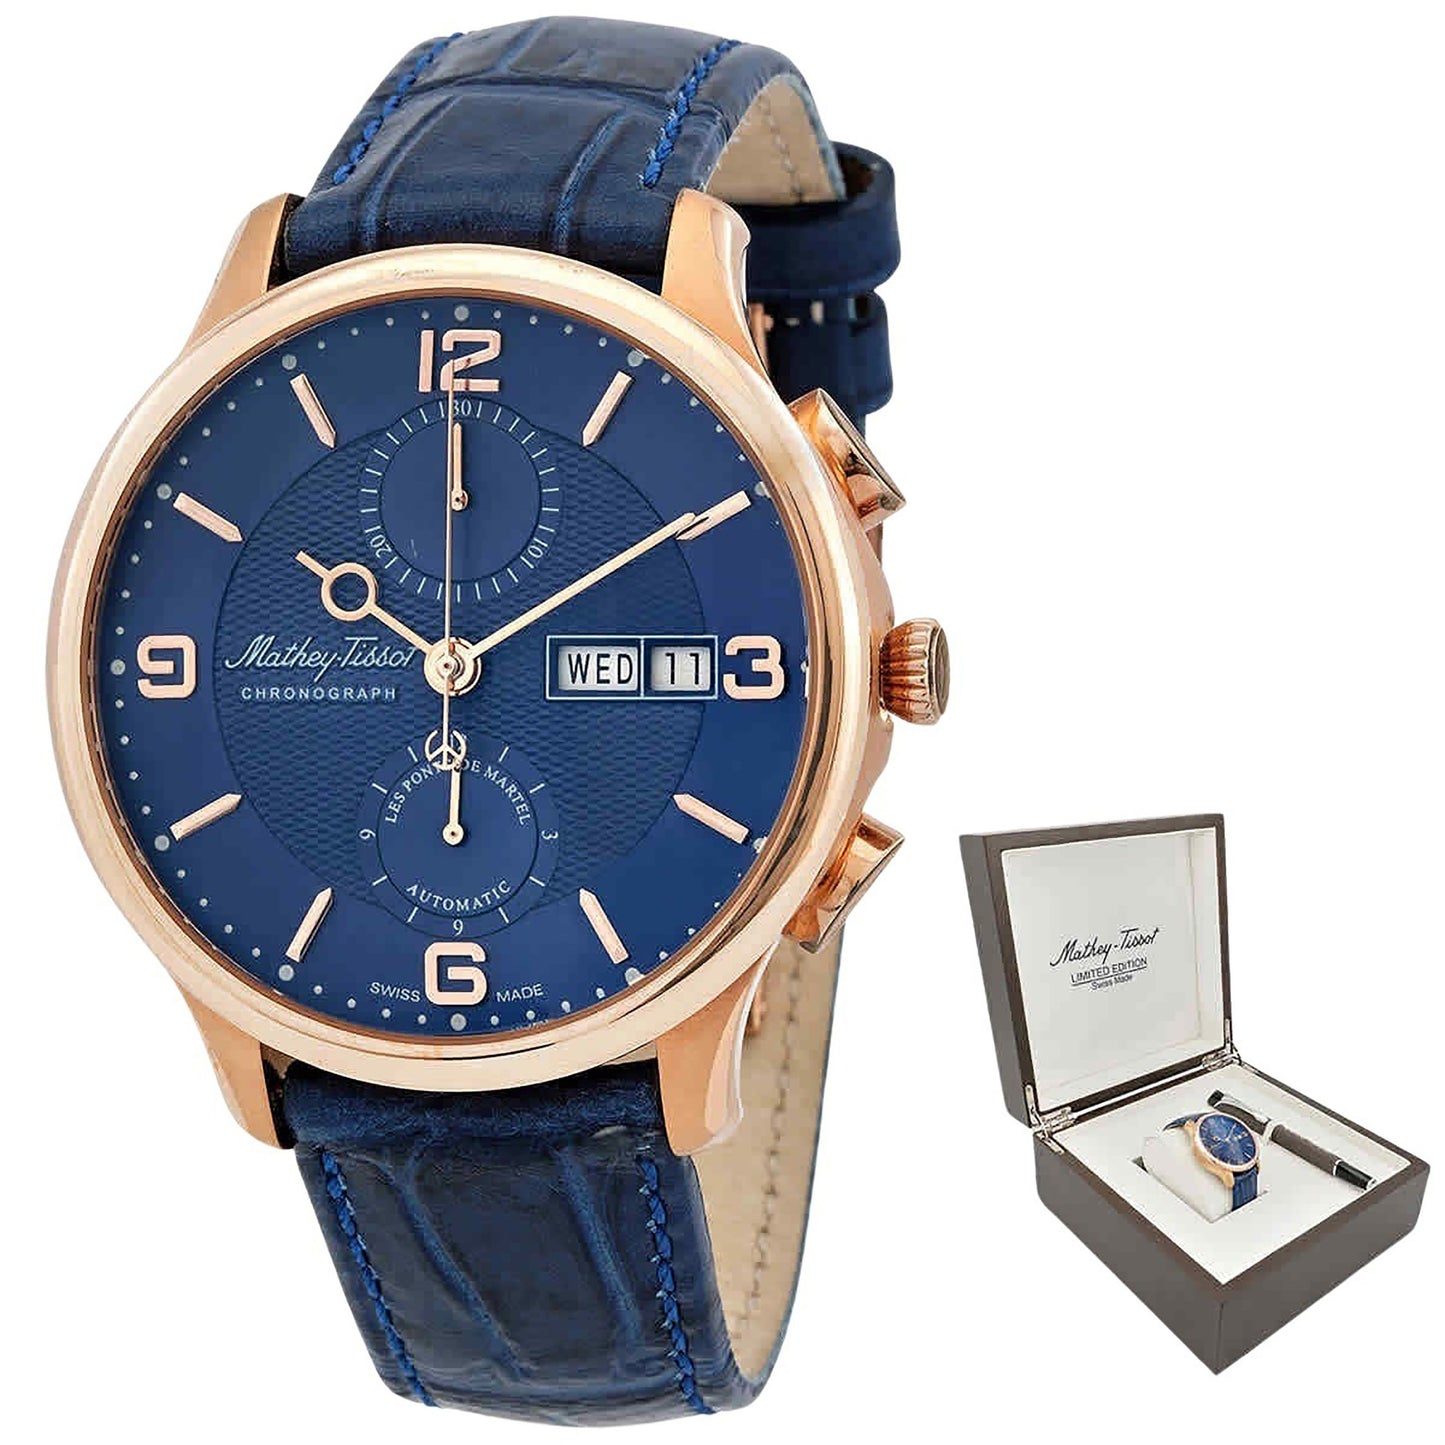 Mathey-Tissot Edmond Chronograph Limited Edition Blue Dial Automatic H1886CHATPBU Men's Watch With Gift Set